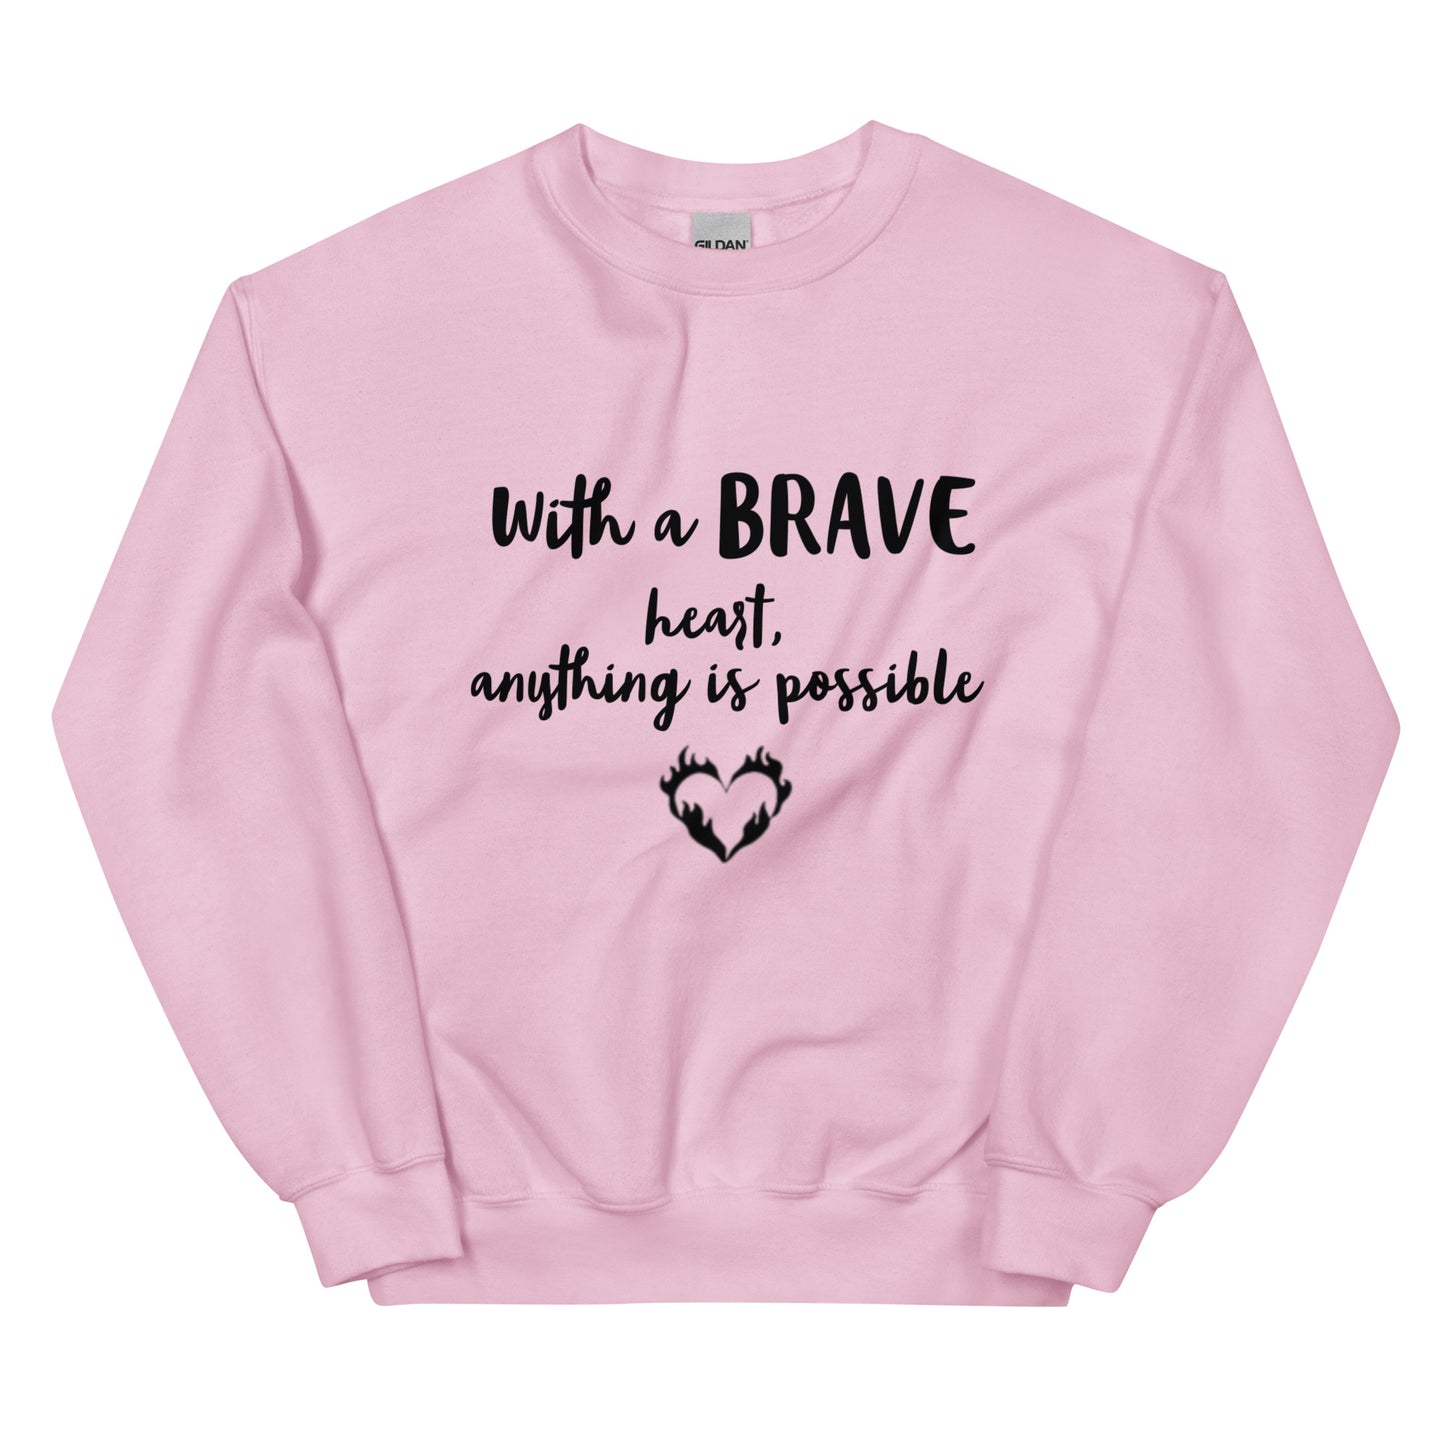 With a Brave Heart anything is possible Unisex Crew Neck Sweatshirt